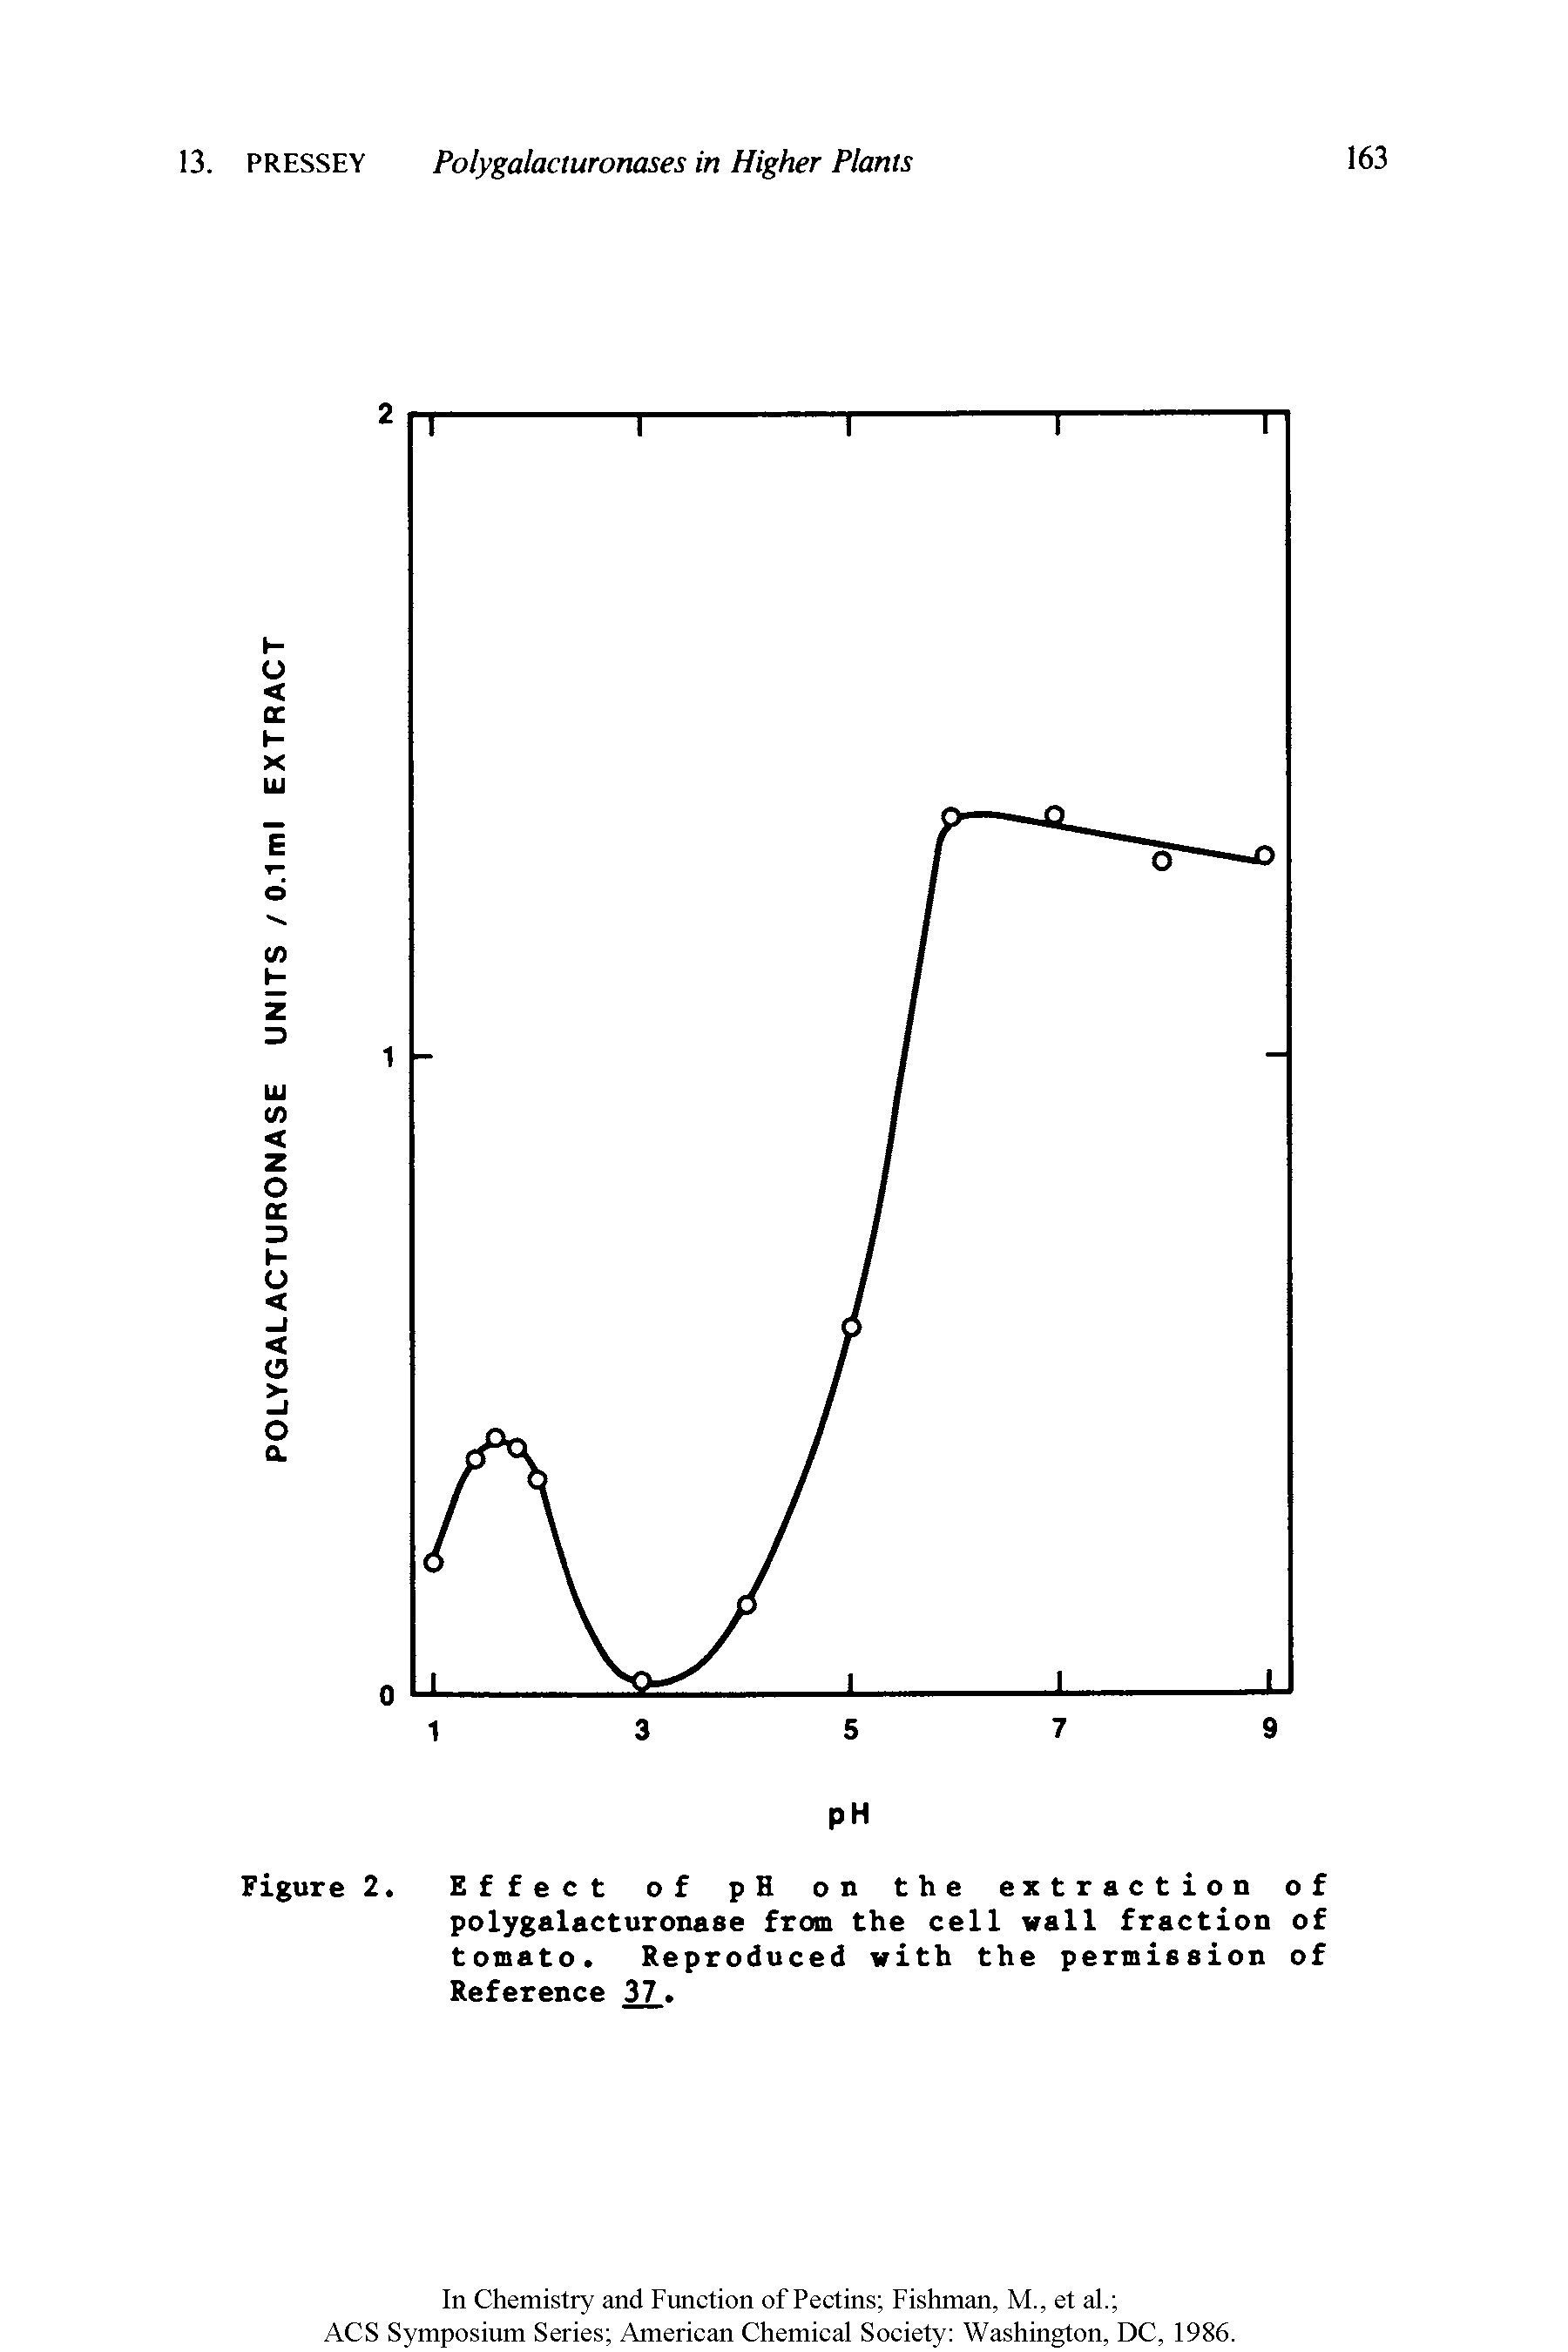 Figure 2 Effect of pH on the extraction of polygalacturonase from the cell wall fraction of tomato Reproduced with the permission of Reference 37 ...